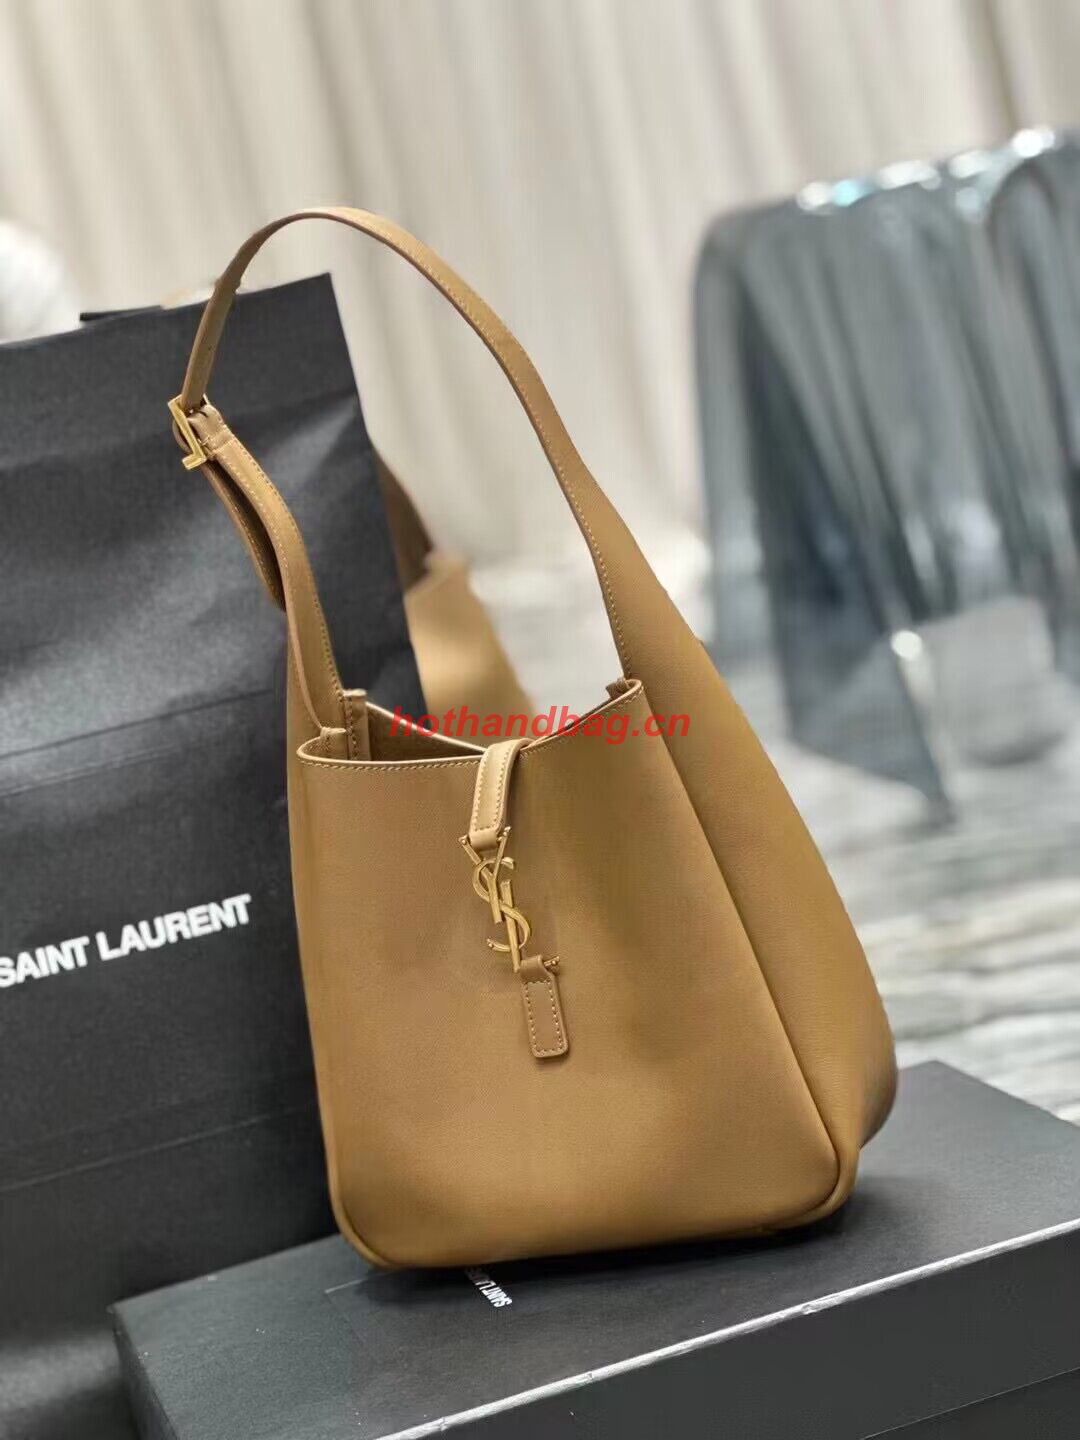 SAINT LAUREN LE 5 A 7 SOFT SMALL IN SMOOTH LEATHER 713938 apricot